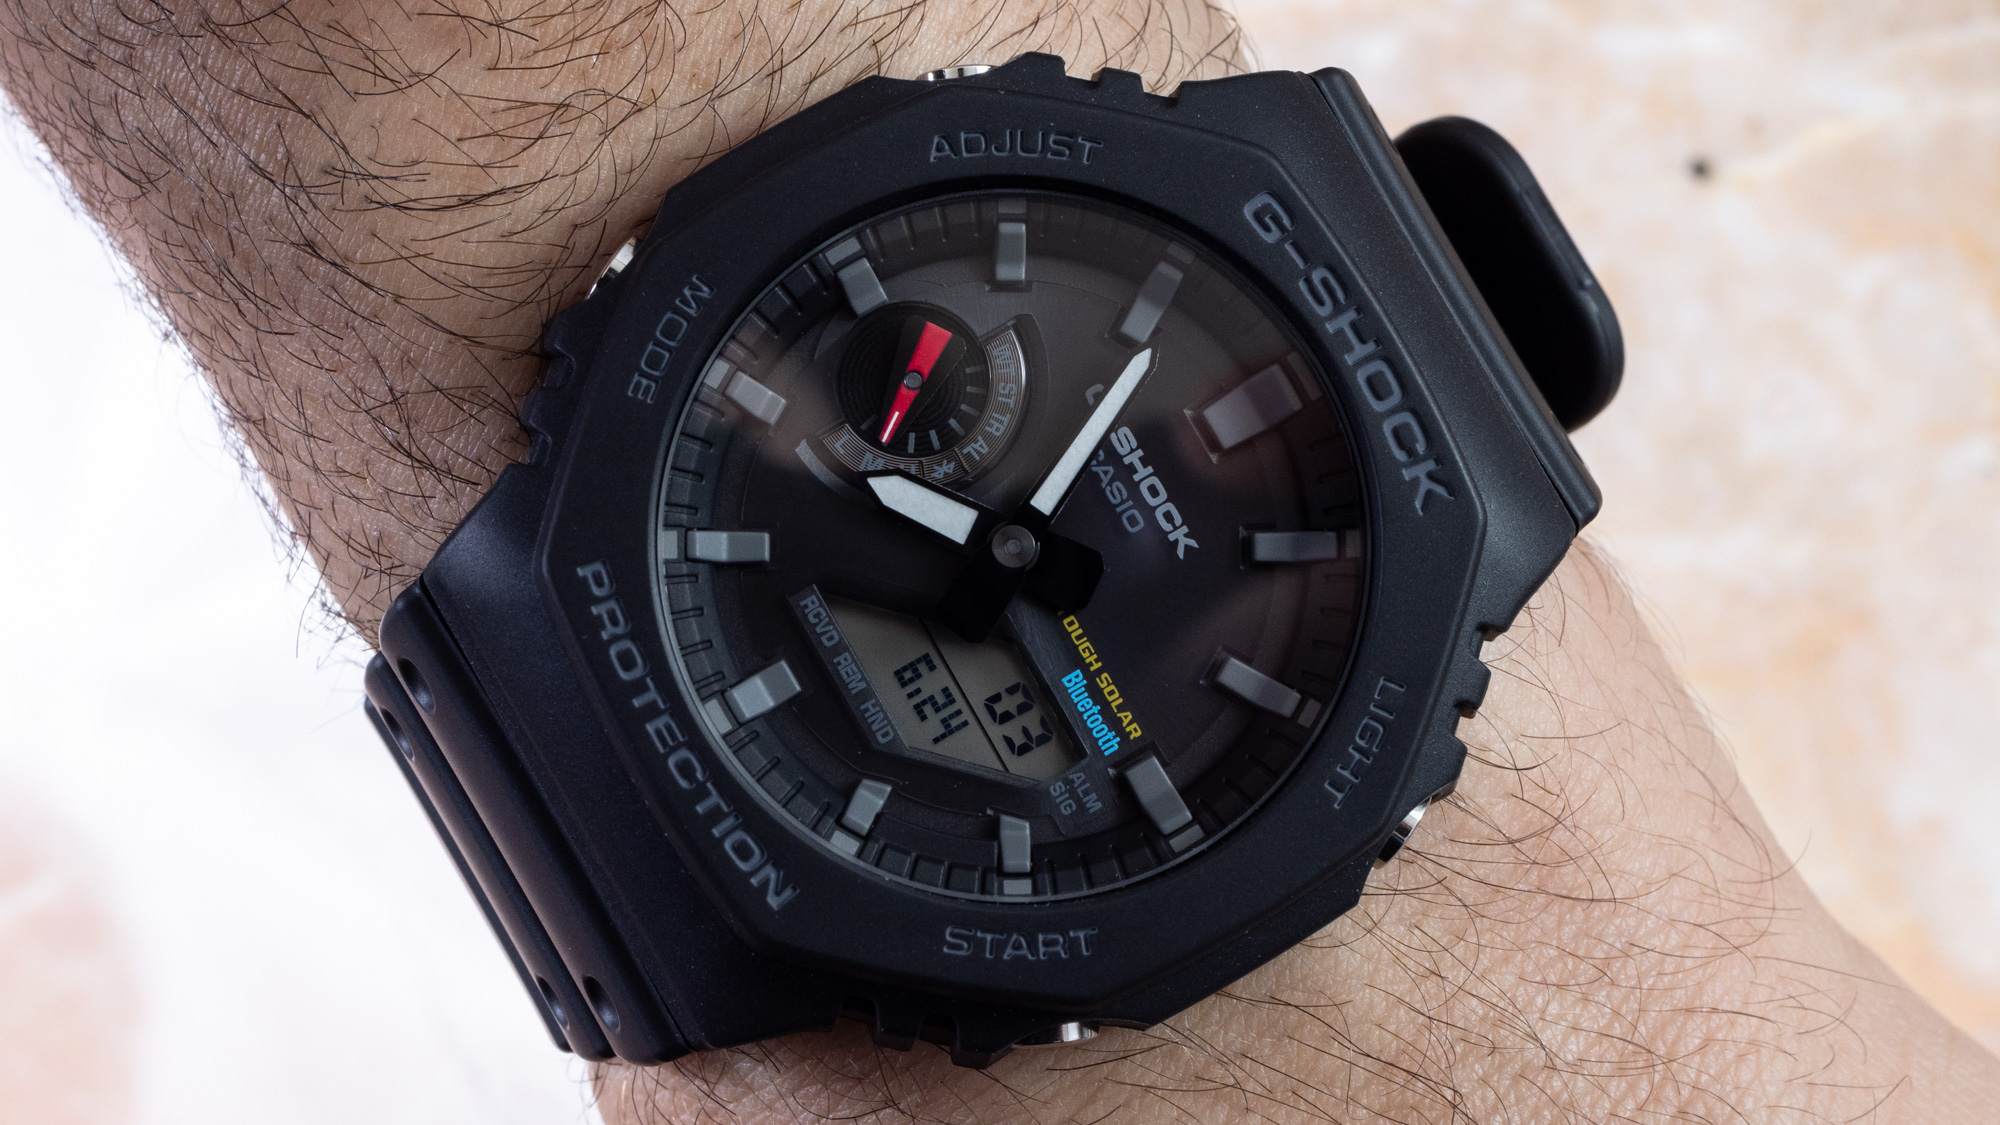 G-Shock GA-2100 Otherwise Known As The CasiOak